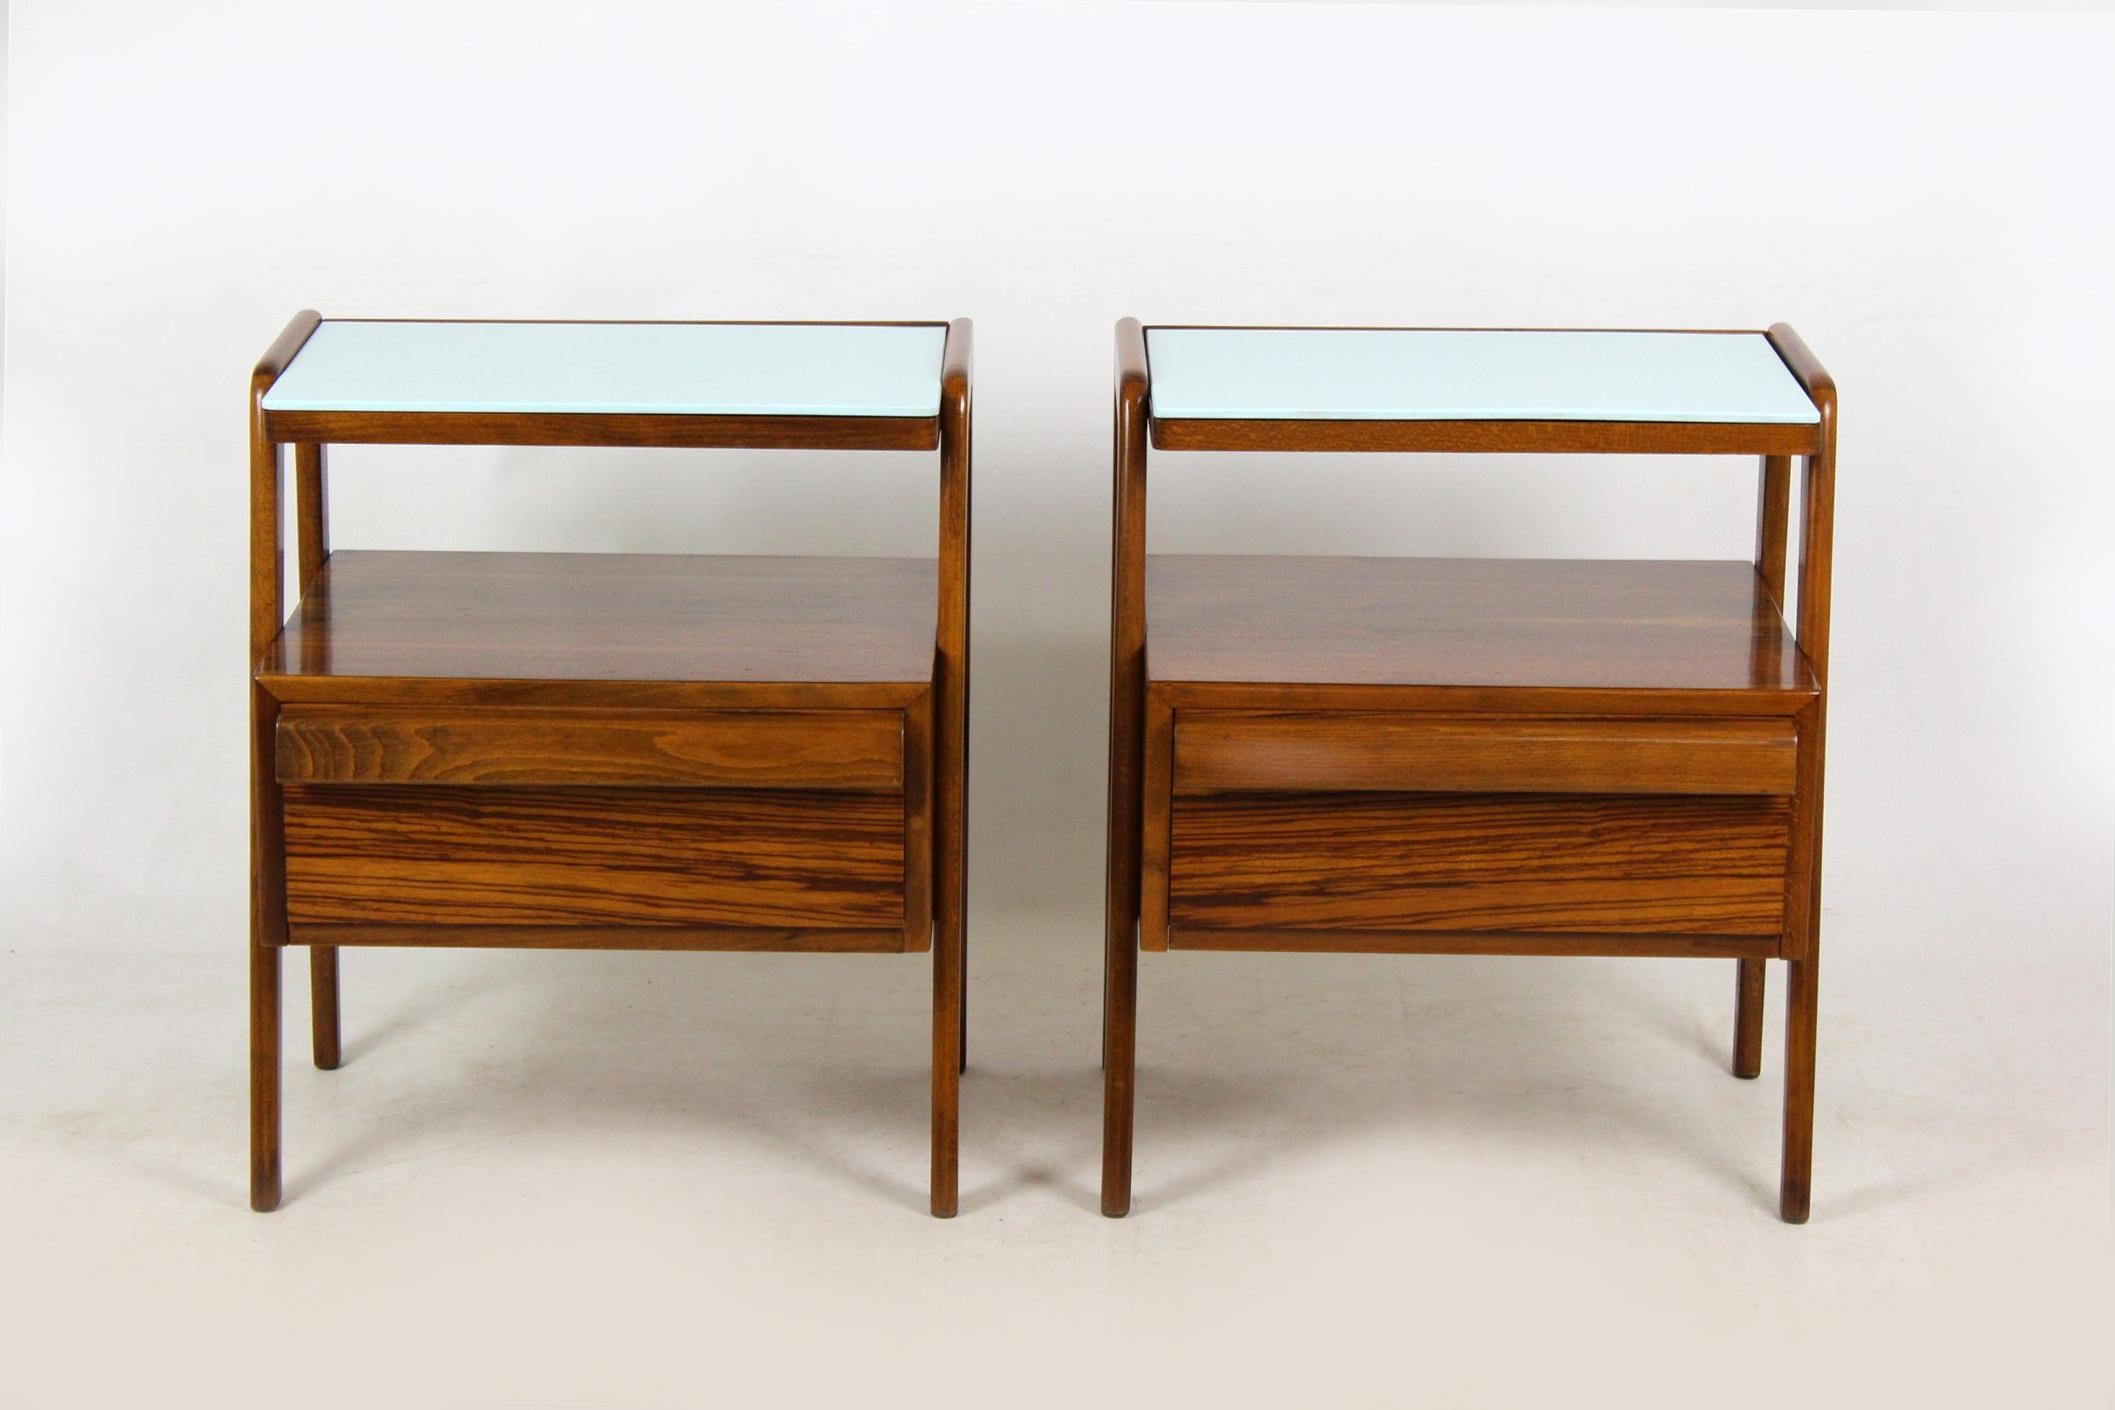 Pair of Mid-Century Modern nightstands, manufactured by Jitona in 1960s.
Nightstands kept in good, vintage condition, features original light blue glass on the tops.